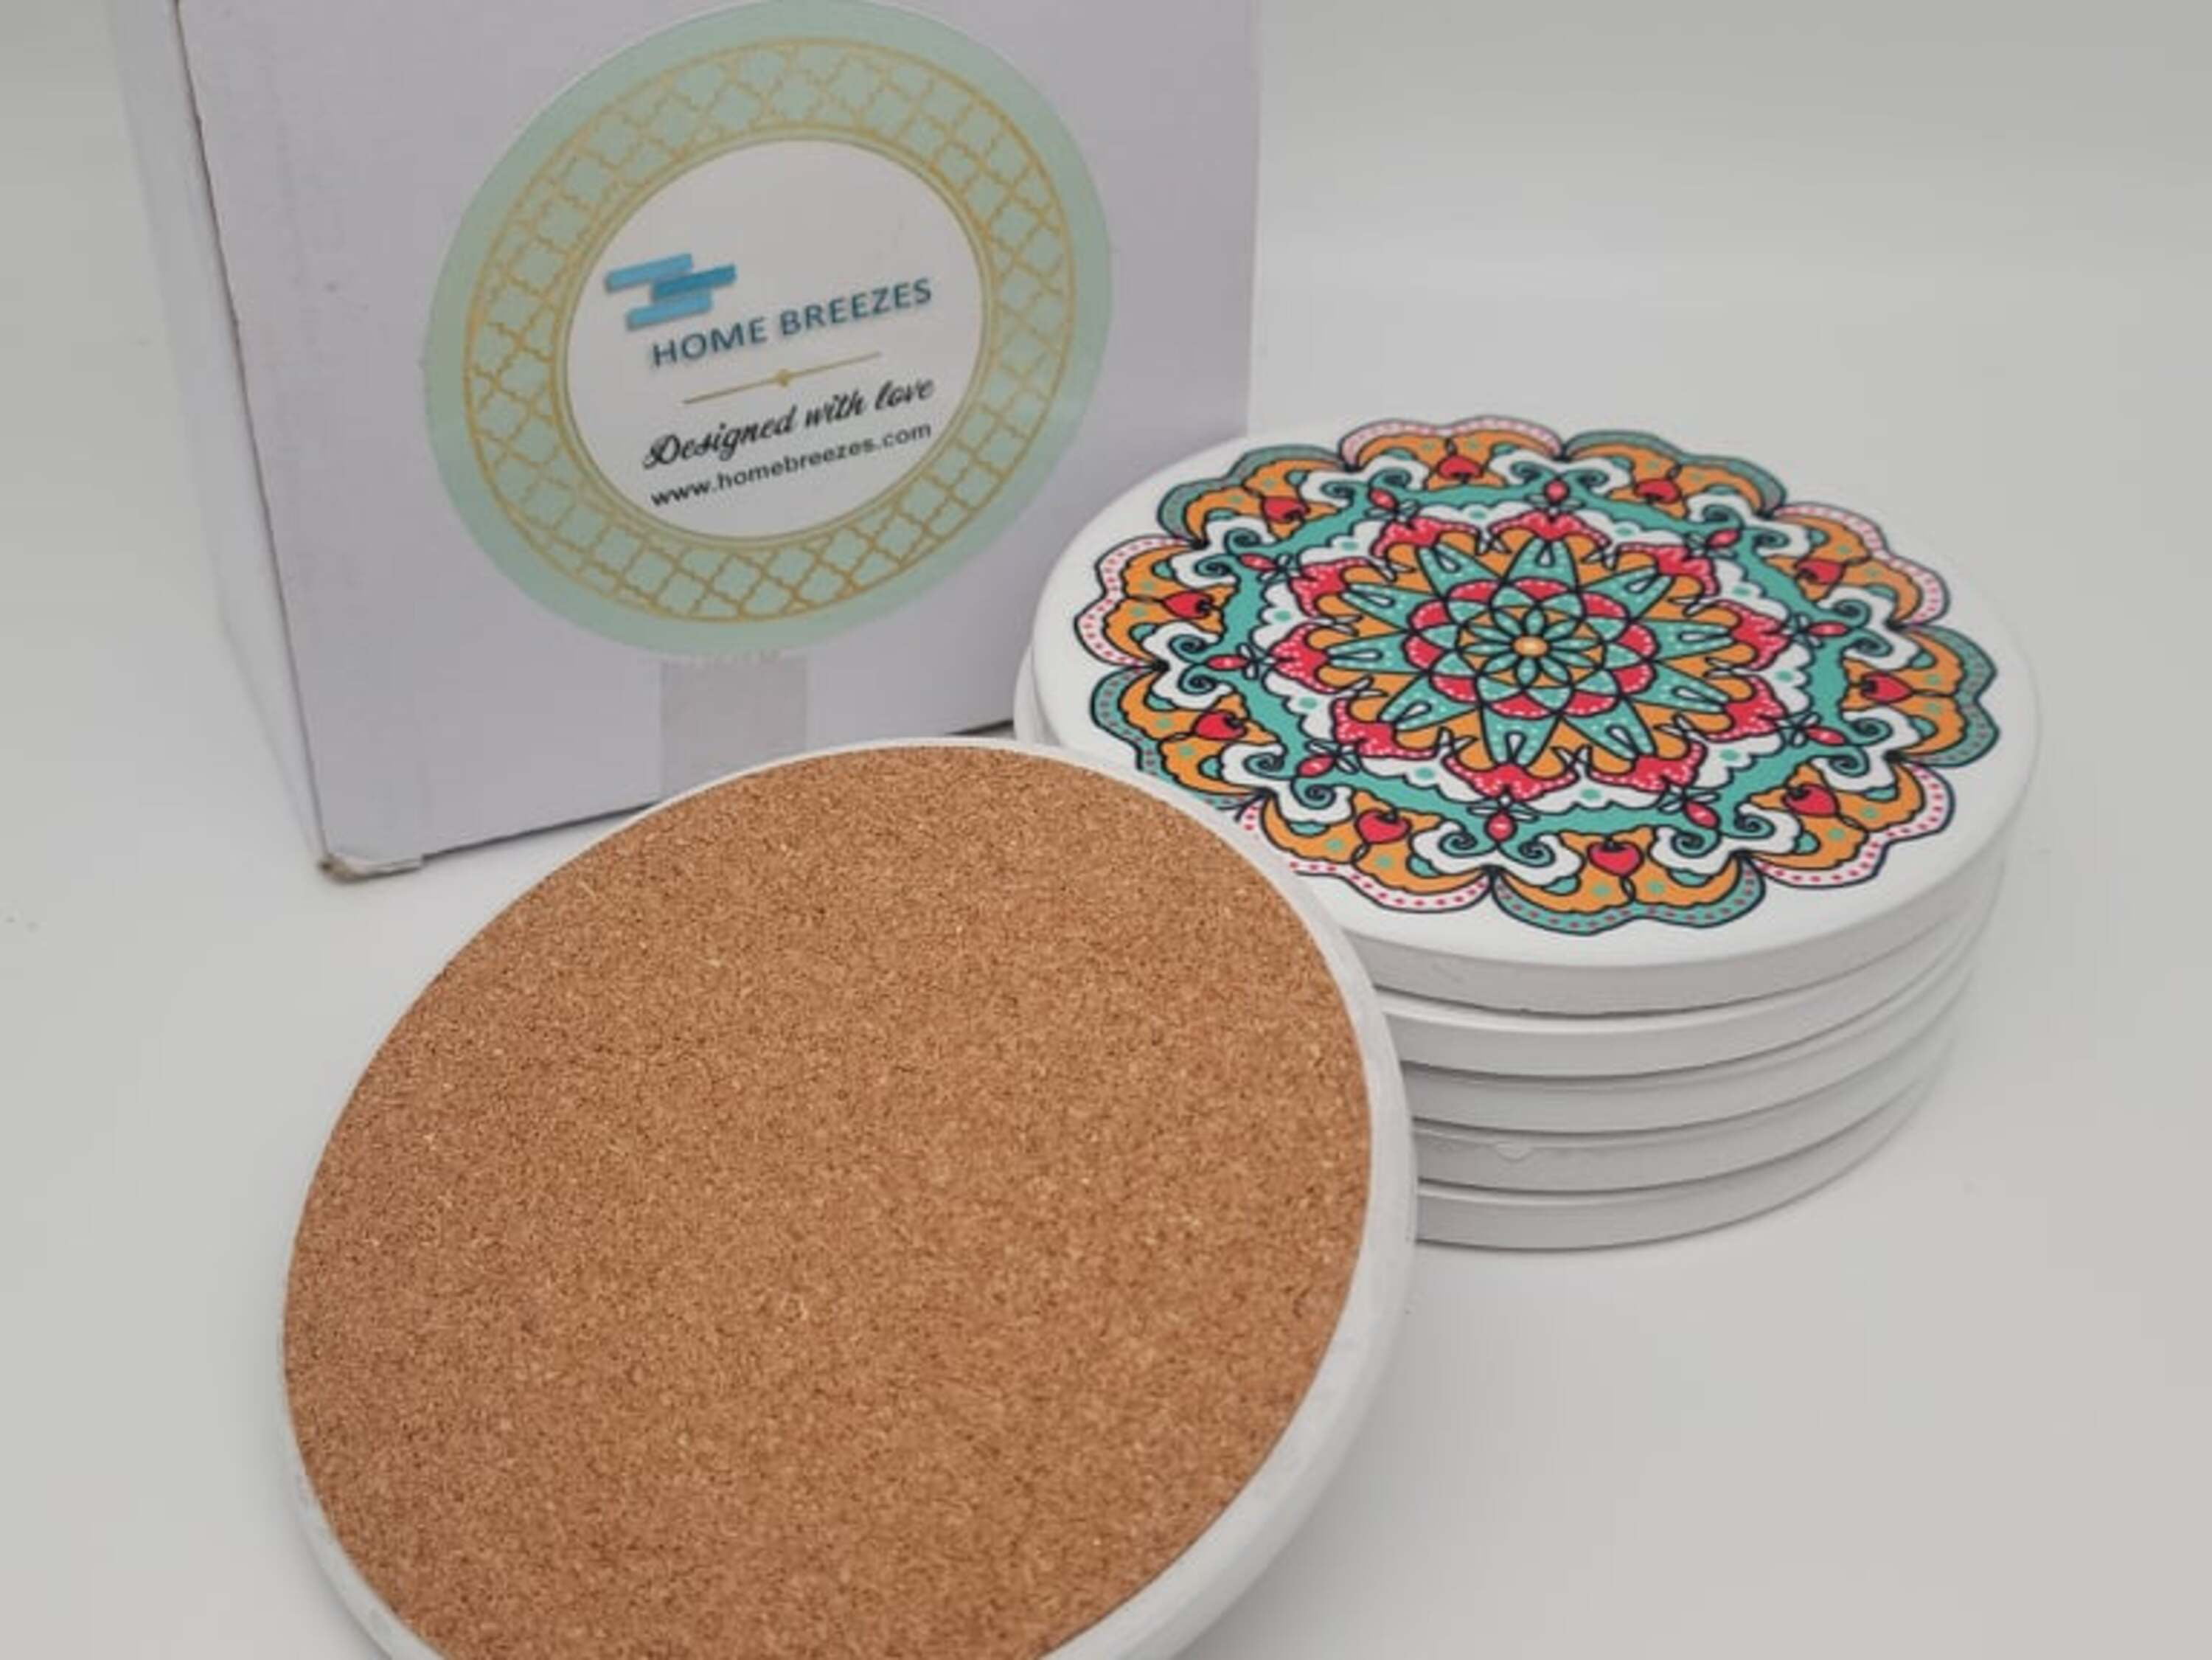 N/B Coaster for Drinks 2 Pack Ceramic Stone Coaster Plant Style Coaster for Drinks in Vibrant Colors and Cork Back Pad Keep Desk Clean and Dry 